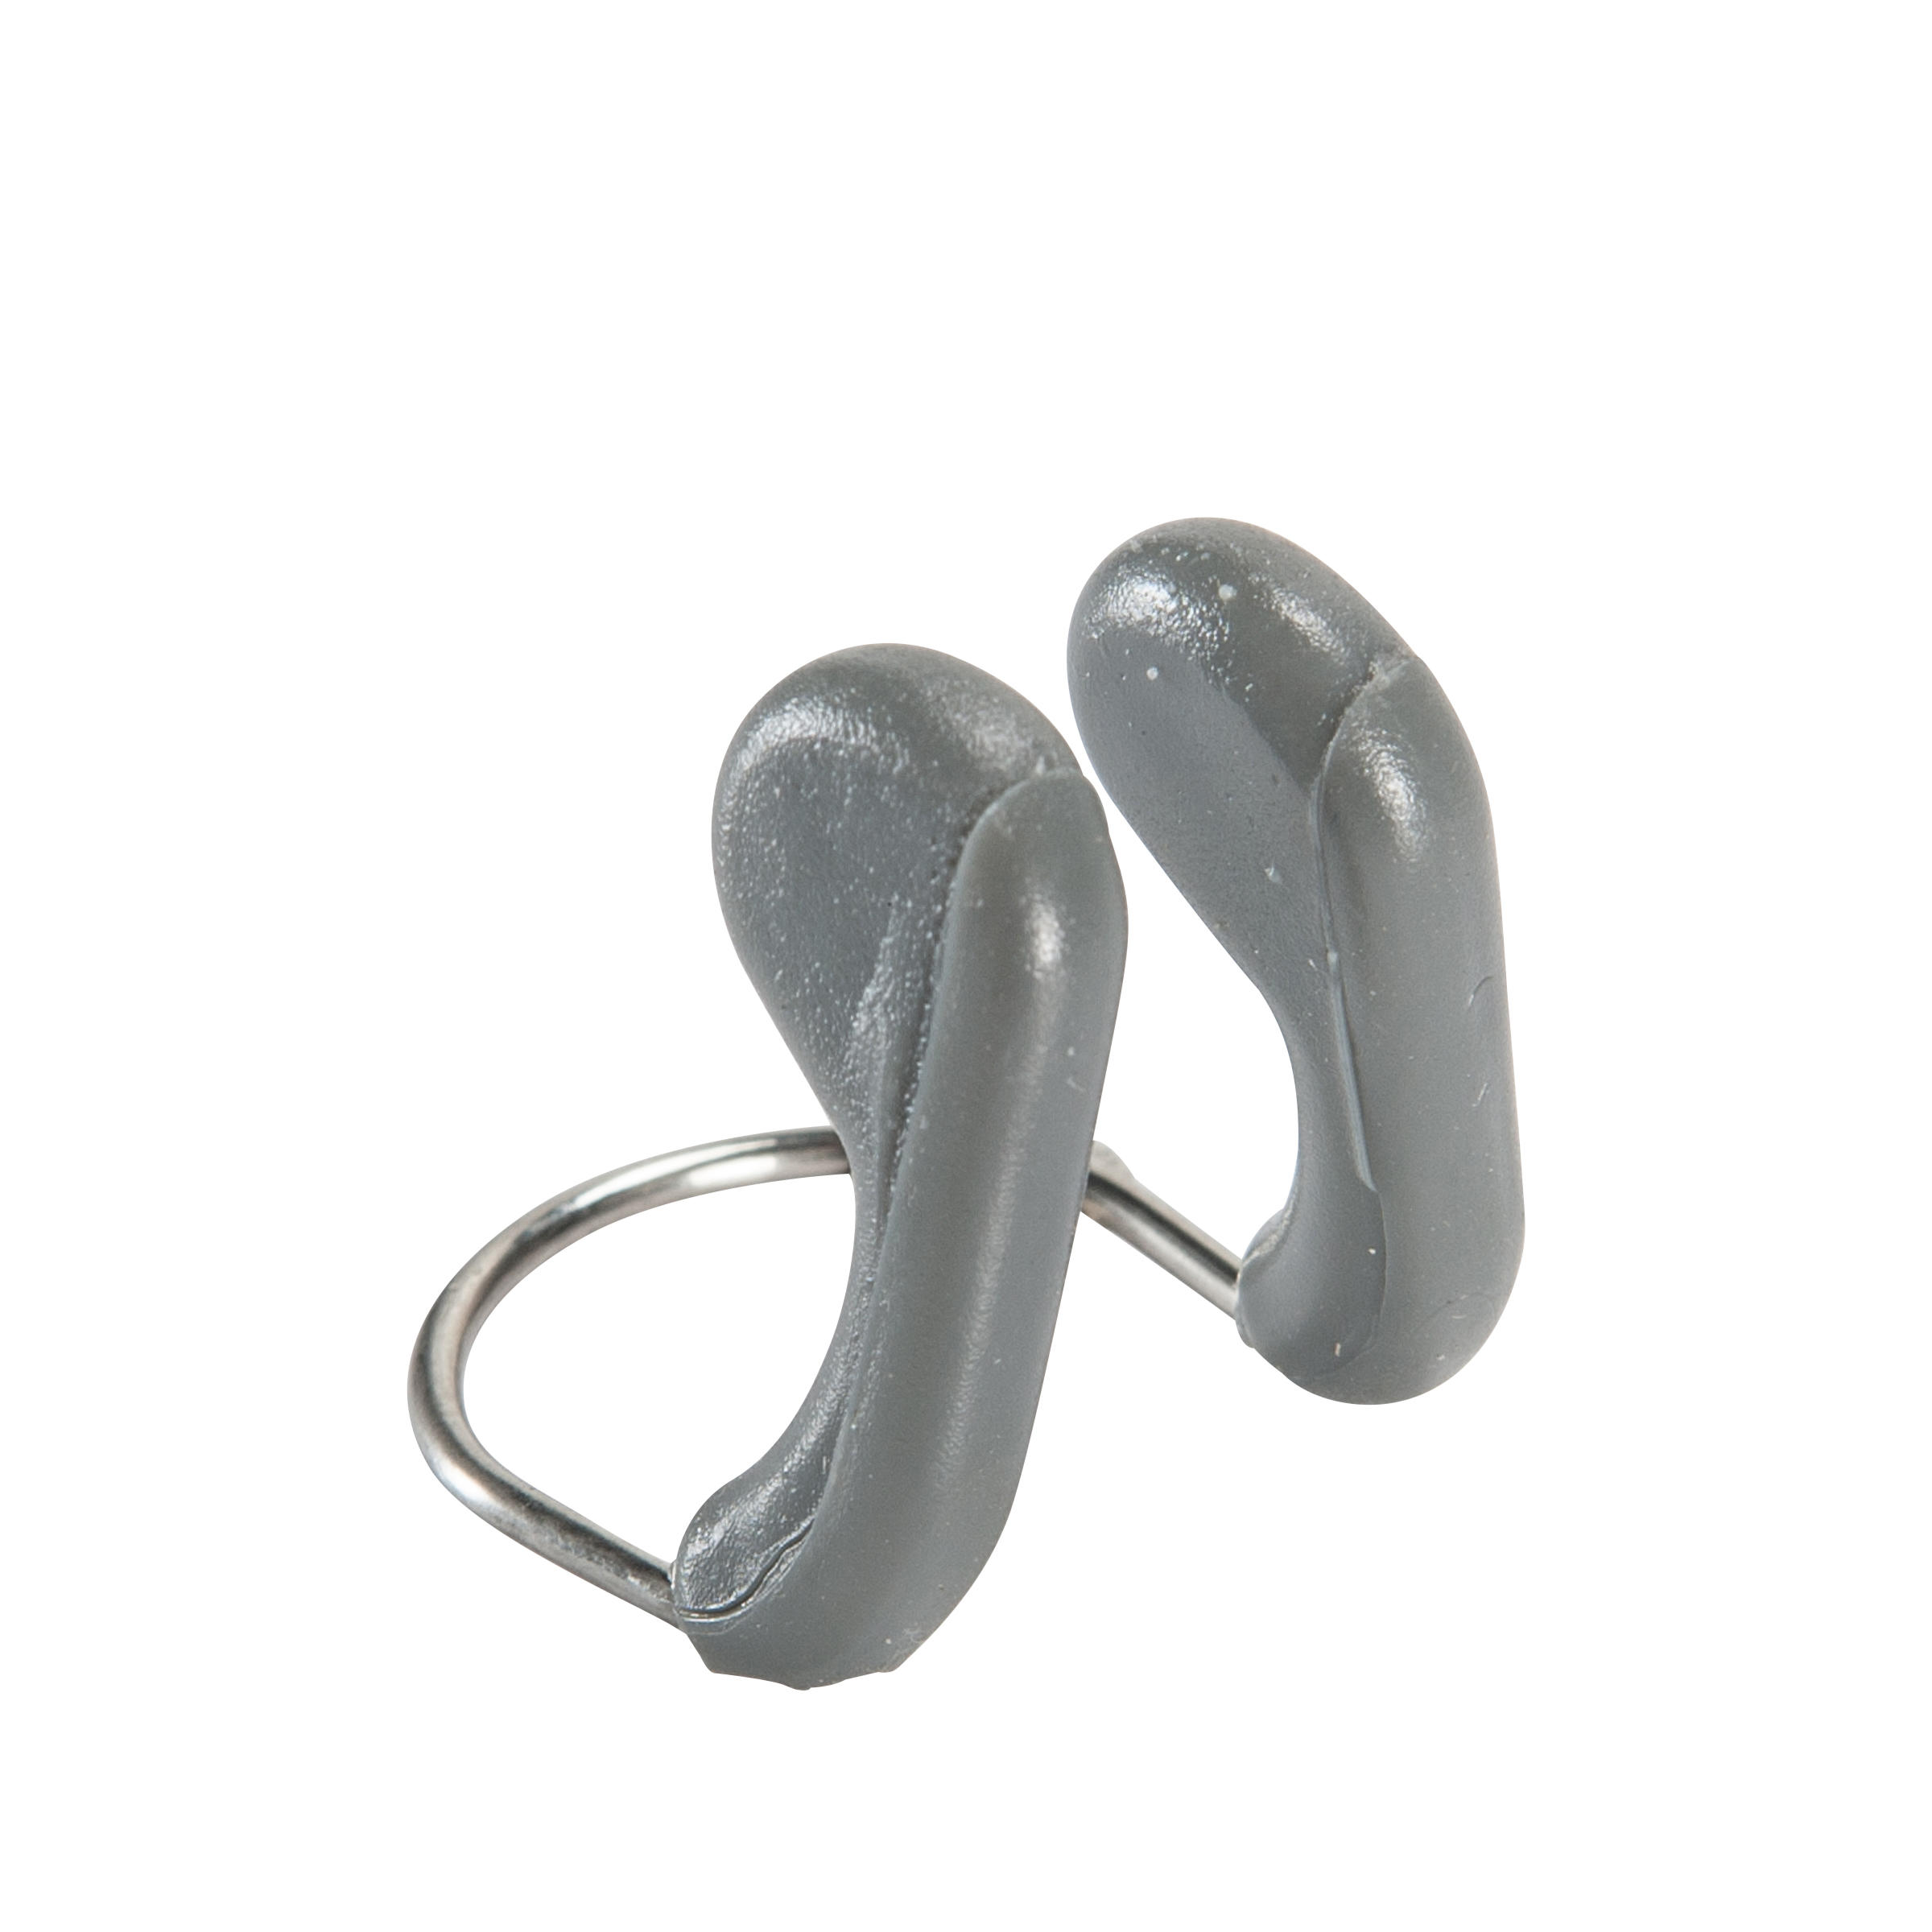 SPEEDO COMPETITION NOSE CLIP - GREY BLUE 3/10